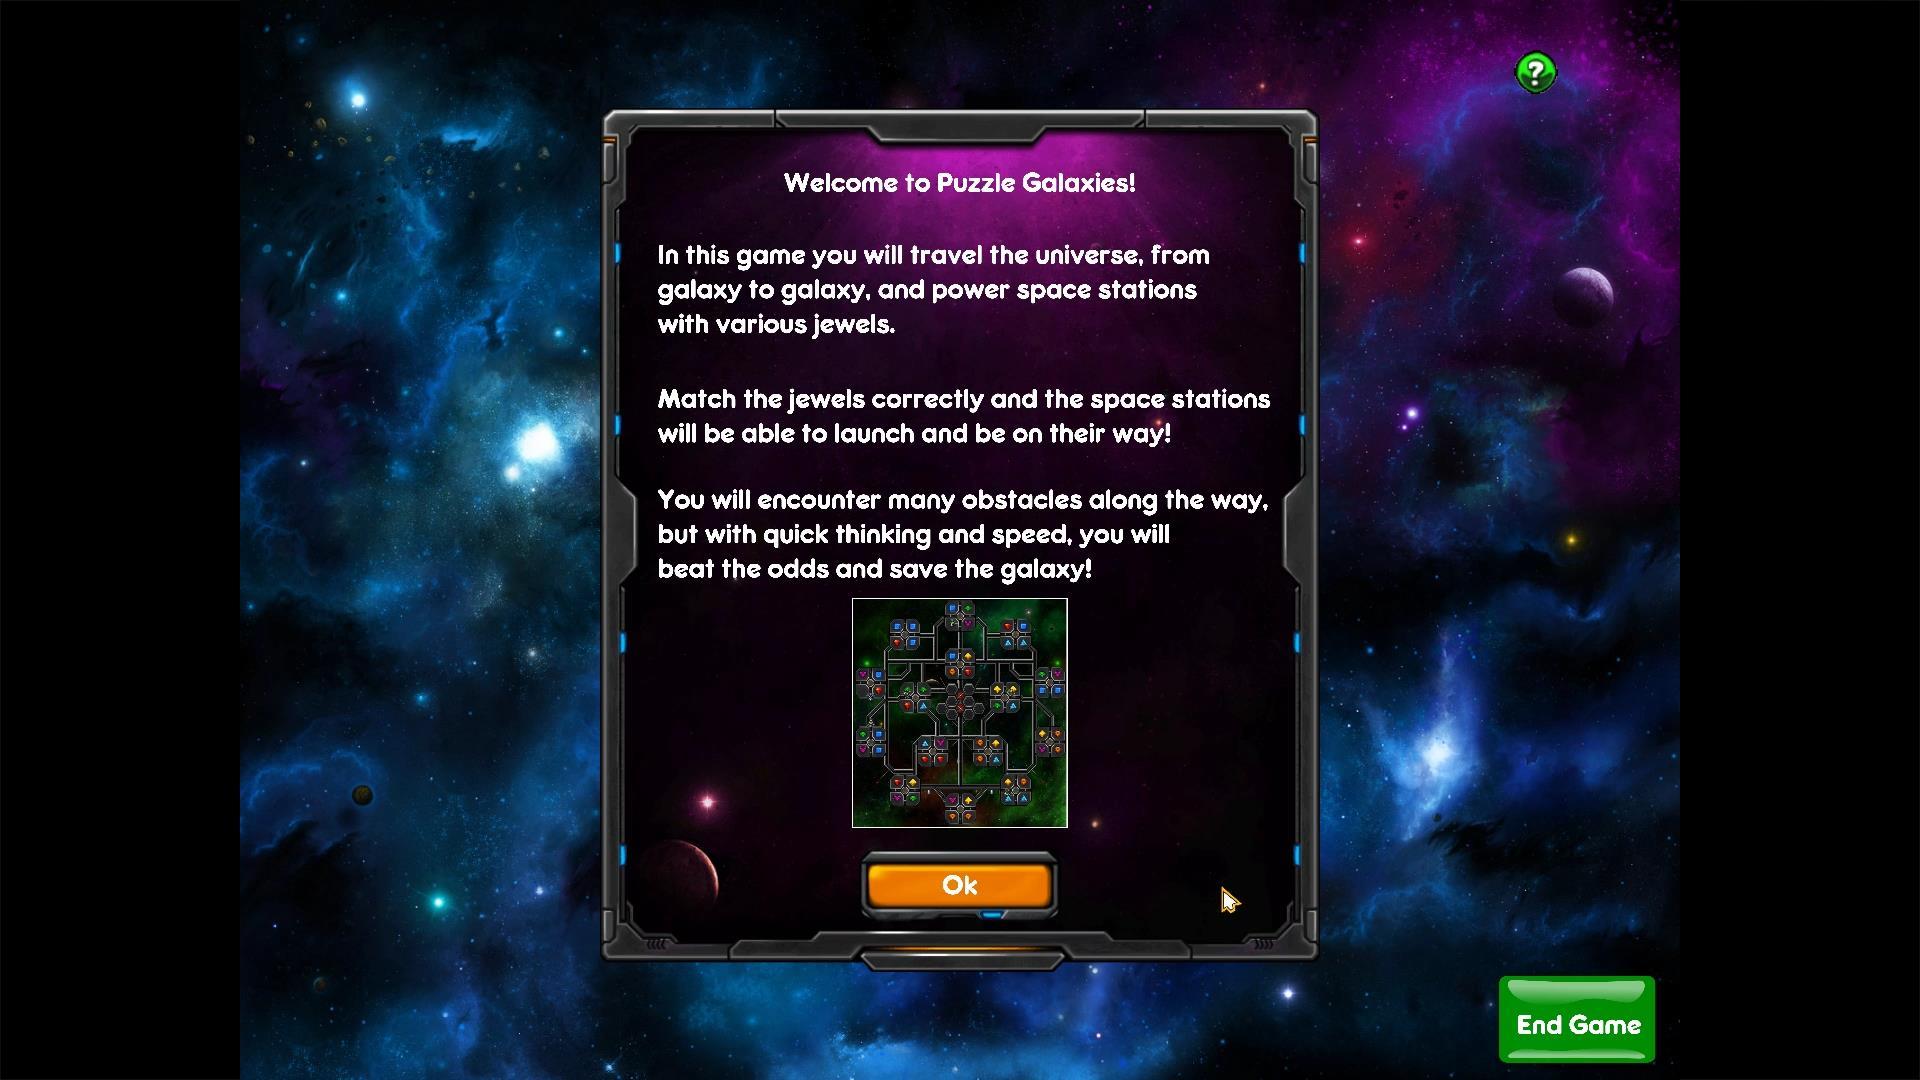 Screenshot №5 from game Puzzle Galaxies